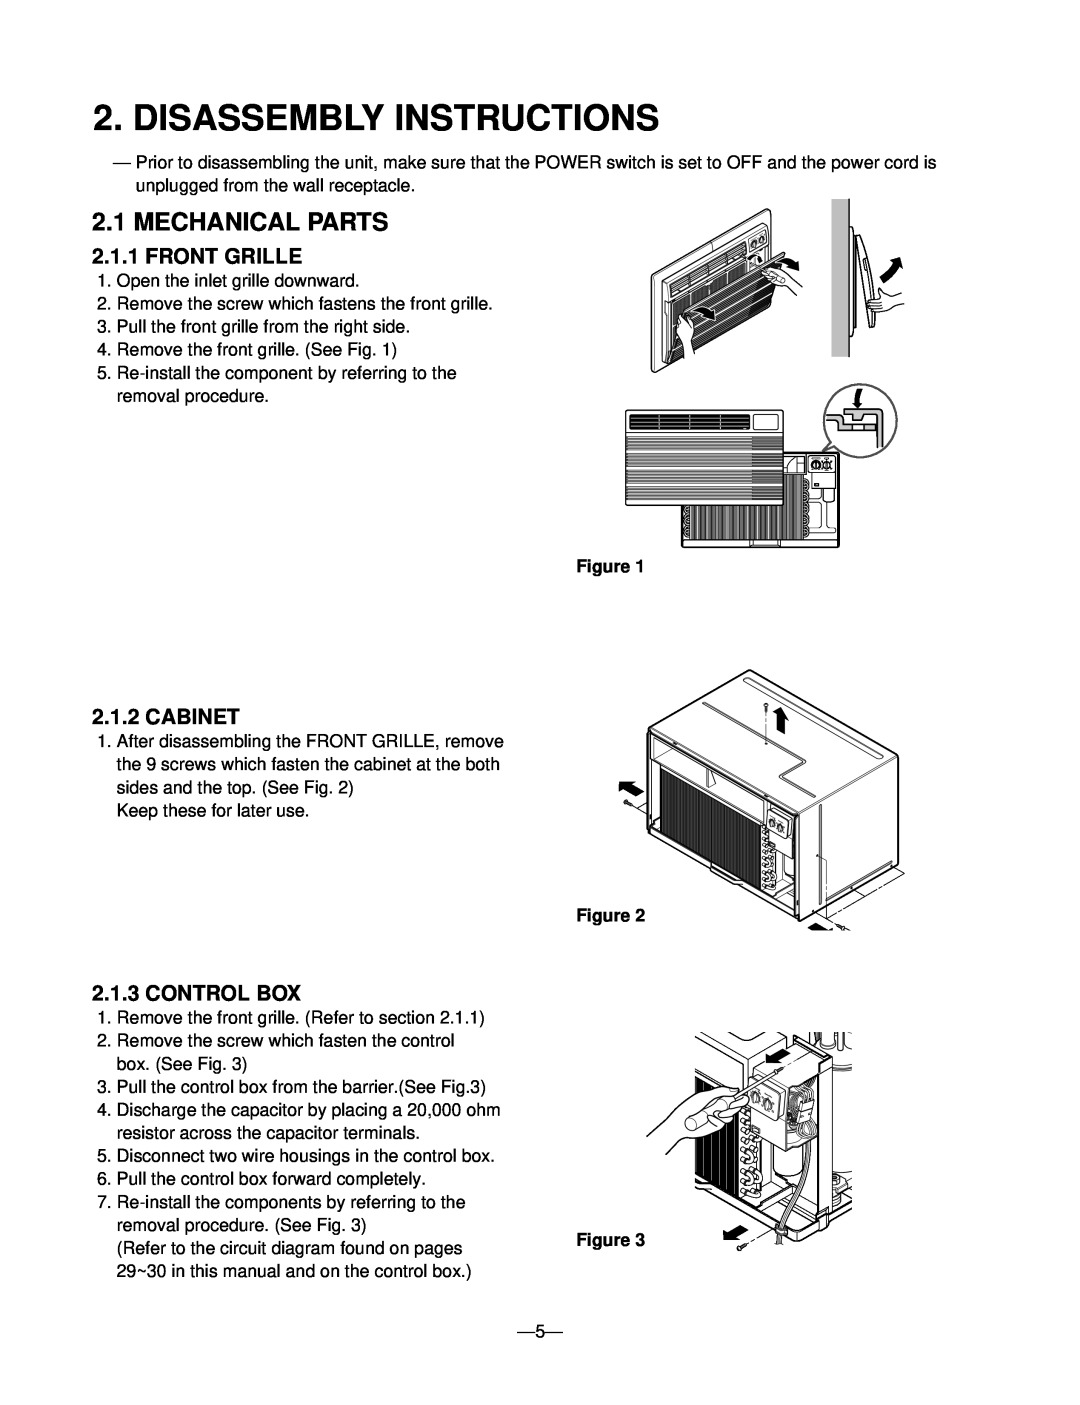 Friedrich UE08, UE12, UE10 manual Disassembly Instructions, Mechanical Parts, Front Grille, Cabinet, Control Box, Figure 